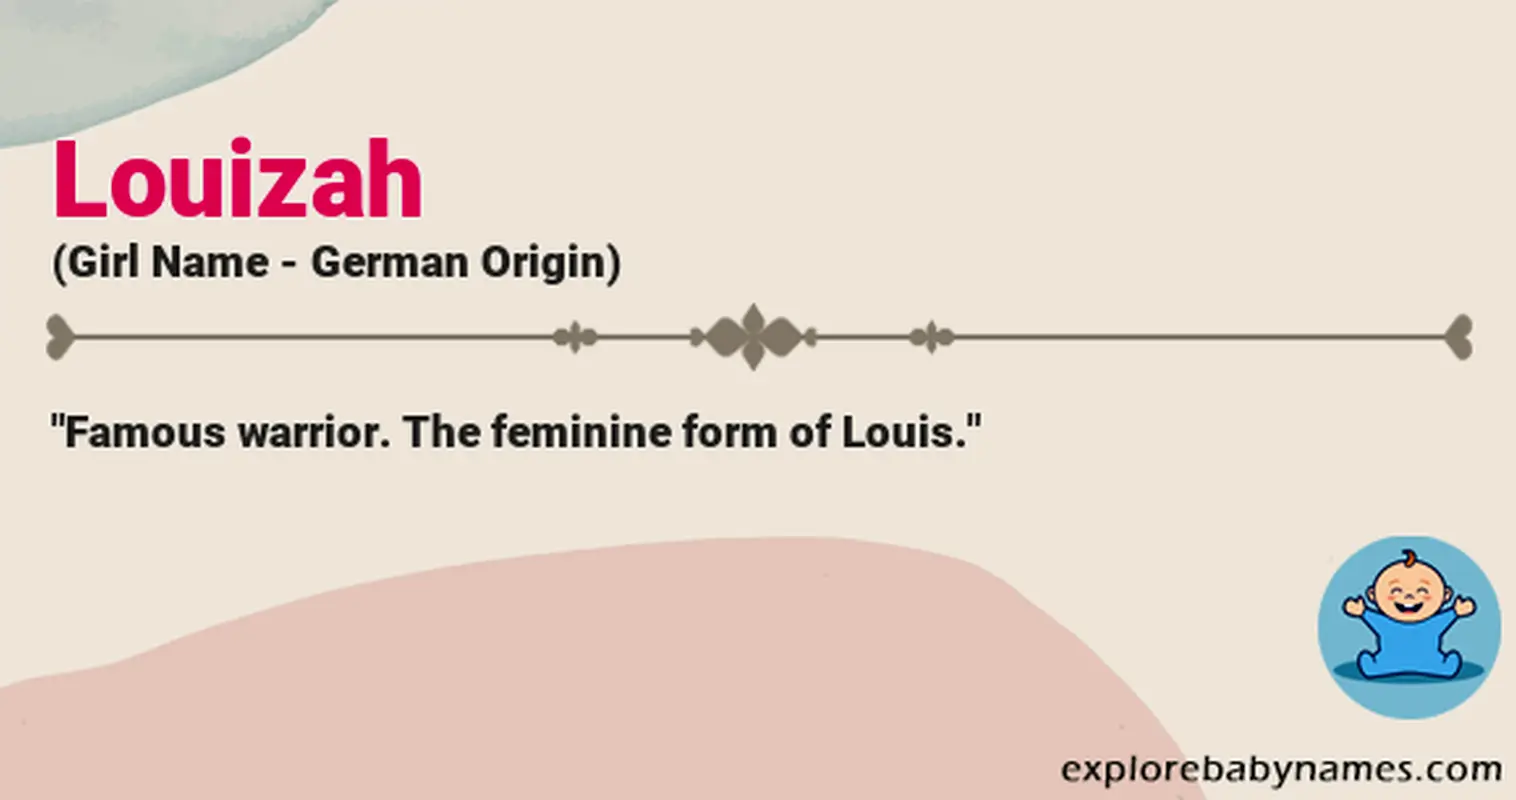 Meaning of Louizah